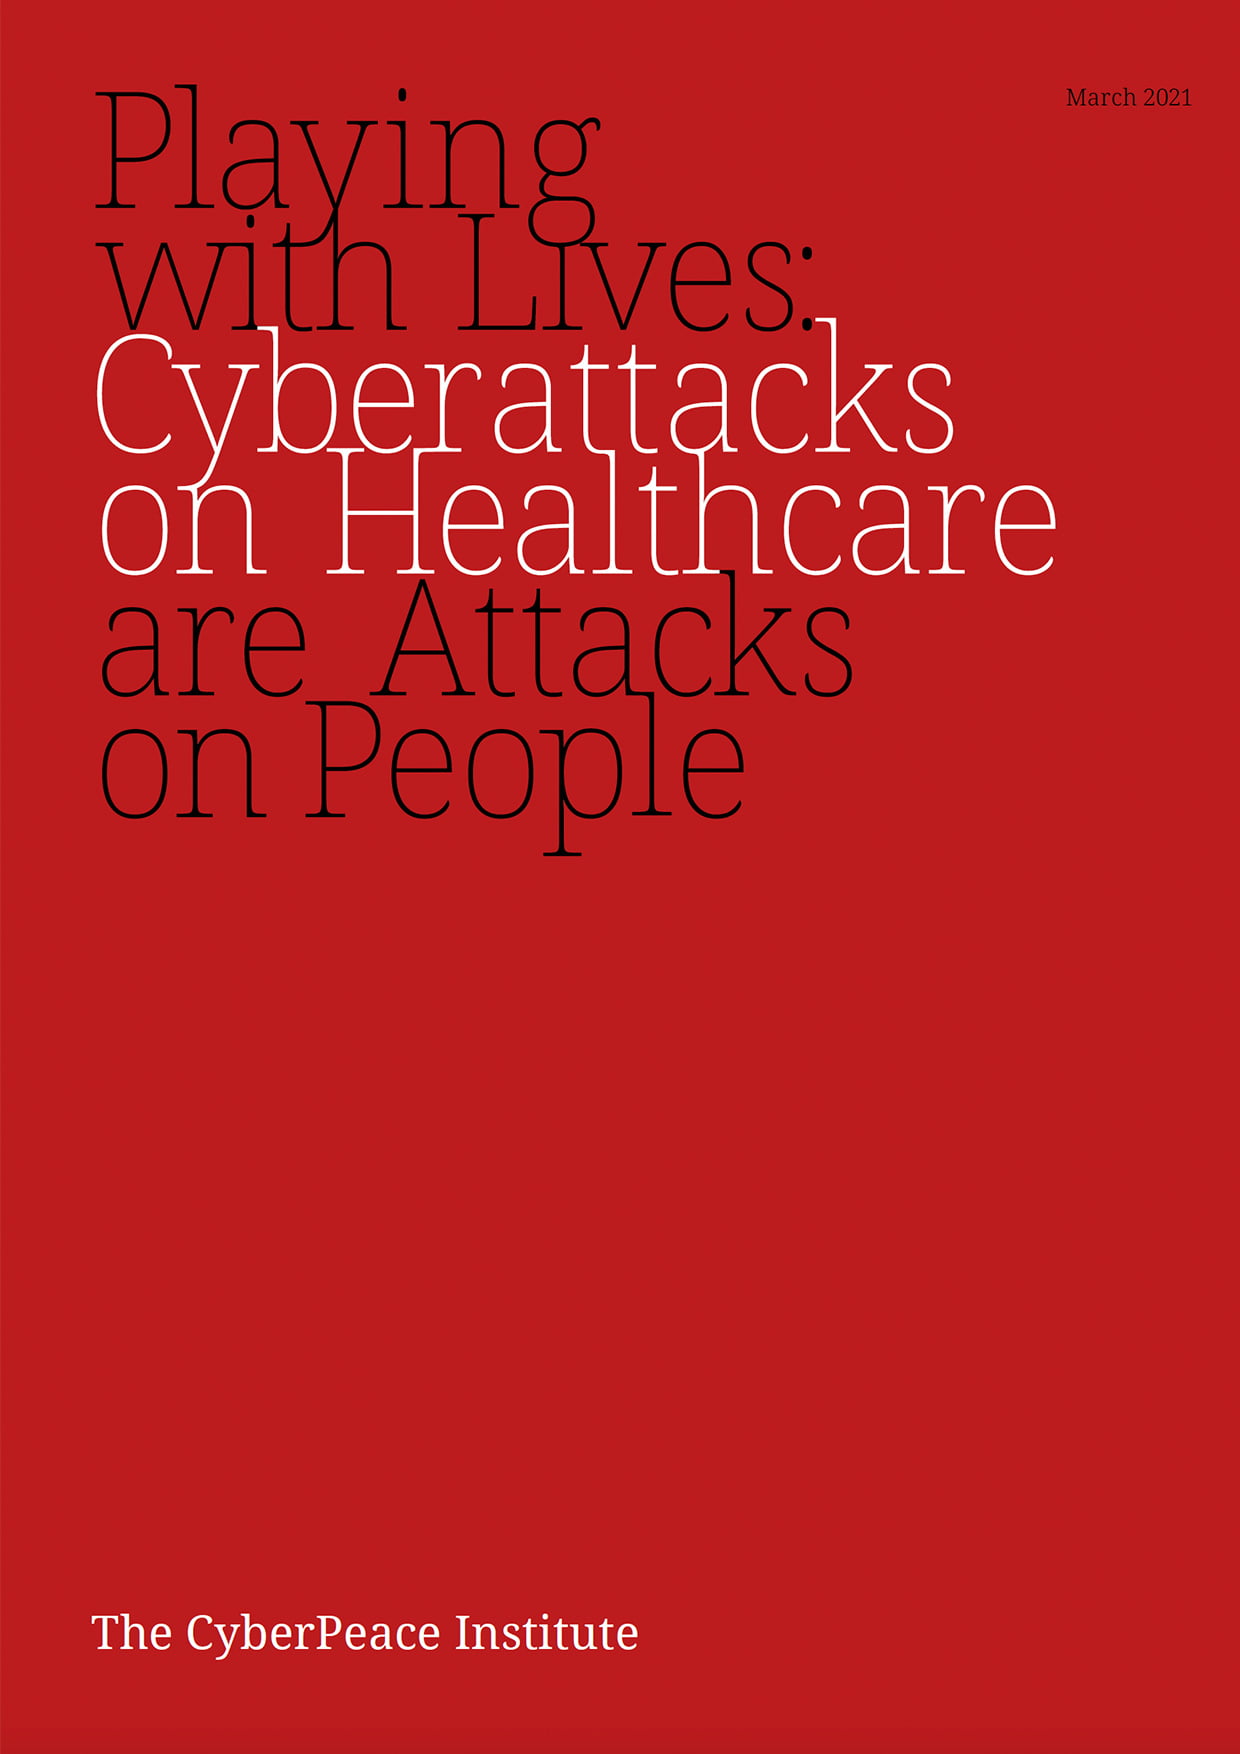 Playing with Lives: Cyberattacks on Healthcare are Attacks on People​